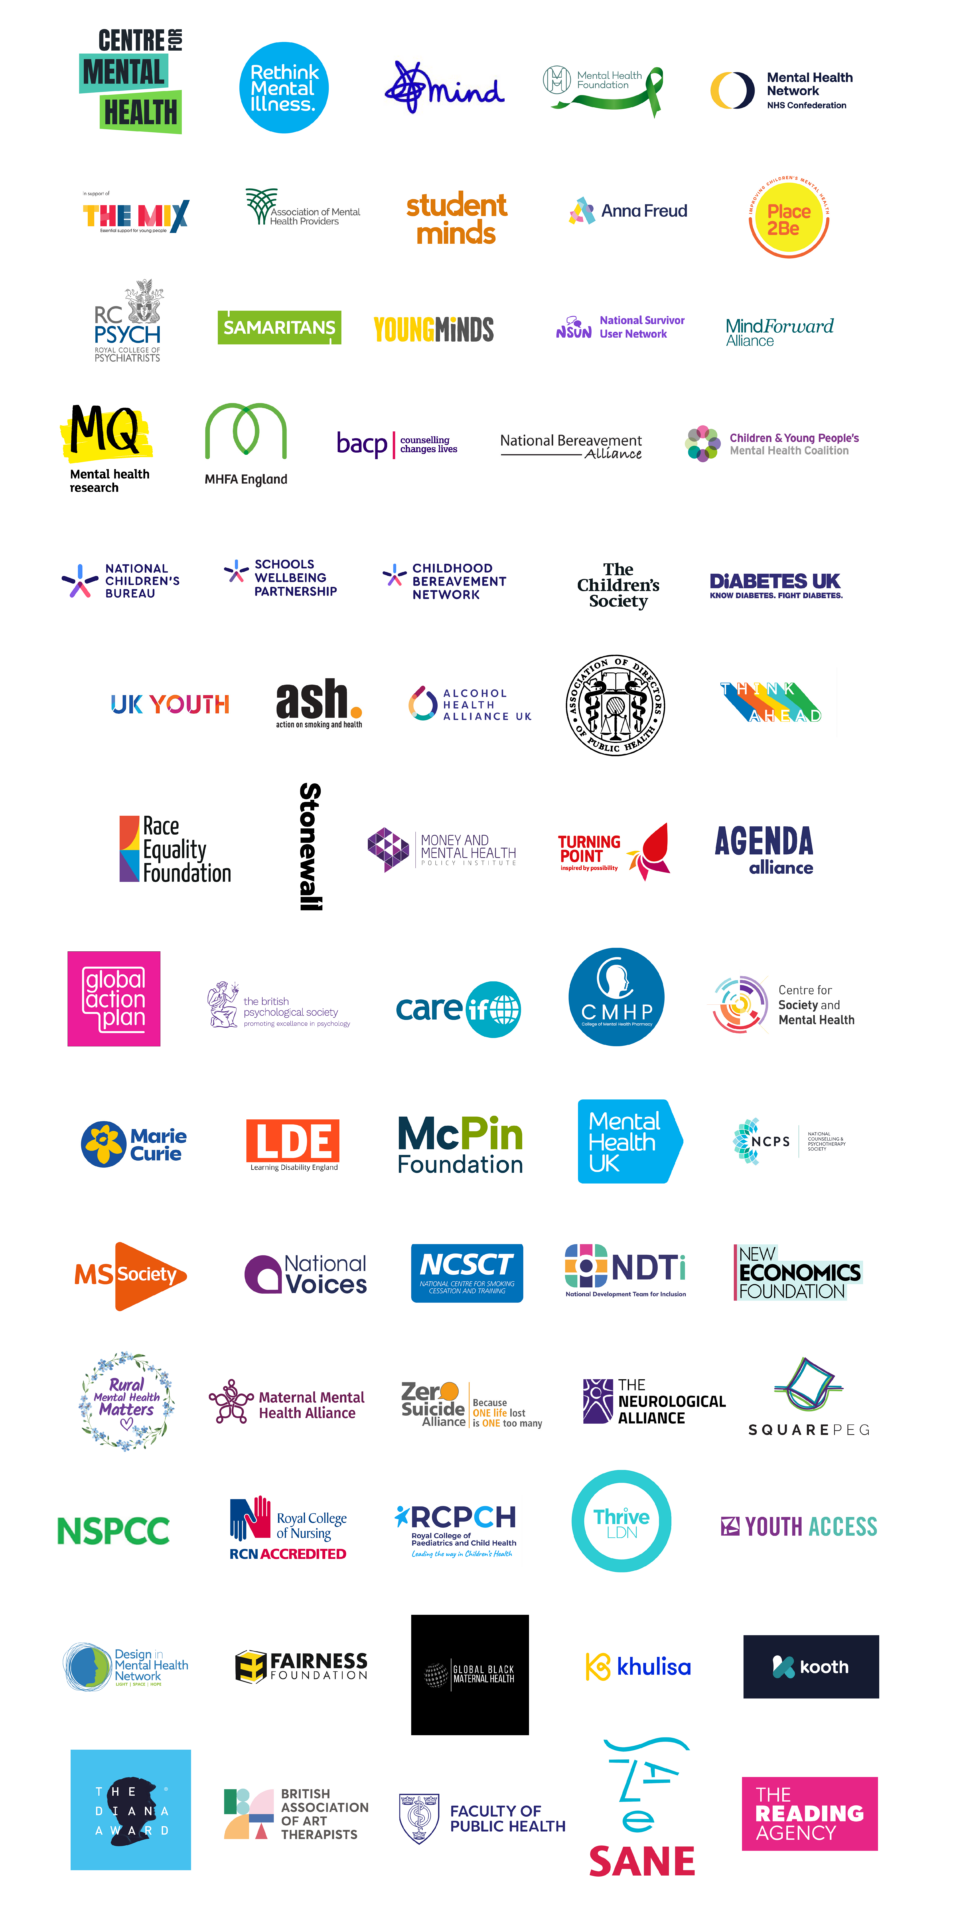 Logos of 70 organisations supporting A Mentally Healthier Nation: Centre for Mental Health, Mental Health Foundation, Mind, NHS Confederation’s Mental Health Network, Rethink Mental Illness, Royal College of Psychiatrists, Association of Mental Health Providers, Student Minds, Anna Freud Centre, The Mix, National Survivor User Network, Mind Forward Alliance, Place2Be, Samaritans, YoungMinds, MQ Mental Health Network, MHFA England, BACP, National Children's Bureau, Schools Wellbeing Partnership, Childhood Bereavement Network, National Bereavement Alliance, Children & Young People's Mental Health Coalition, UK Youth, ASH, Alcohol Health Alliance UK, Association of Directors of Public Health, The Children's Society, Diabetes UK, Race Equality Foundation, Stonewall, Money & Mental Health Policy Institute, Turning Point, Agenda Alliance, Think Ahead, Global Action Plan, BPS, CareIf, CMHP, Centre for Society & Mental Health, Marie Curie, MS Society, National Voices, NCSCT, NDTI, New Economics Foundation, The Neurological Alliance, NSPCC, Royal College of Nursing, RCPCH, Thrive LDN, Youth Access and others